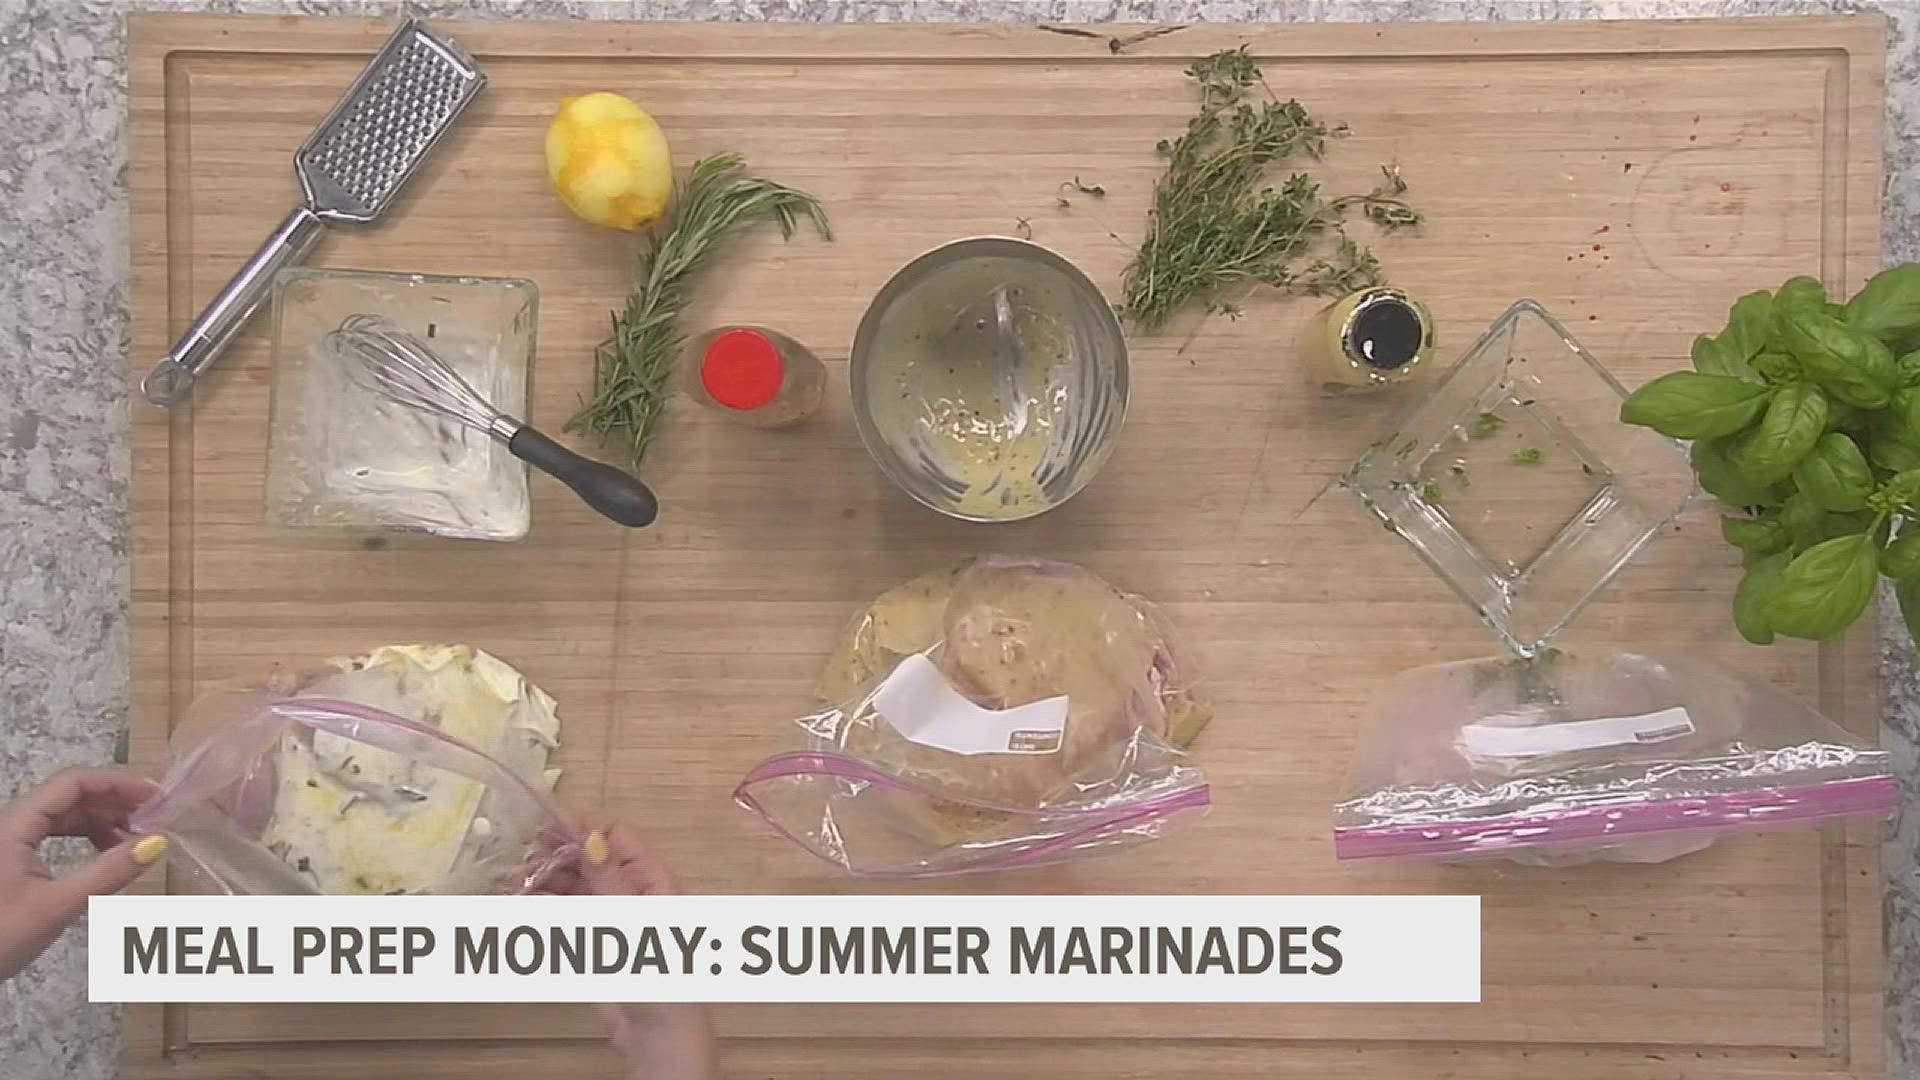 Whether you prefer, seafood, chicken, or pork, we've got an easy summer dish to marinate.